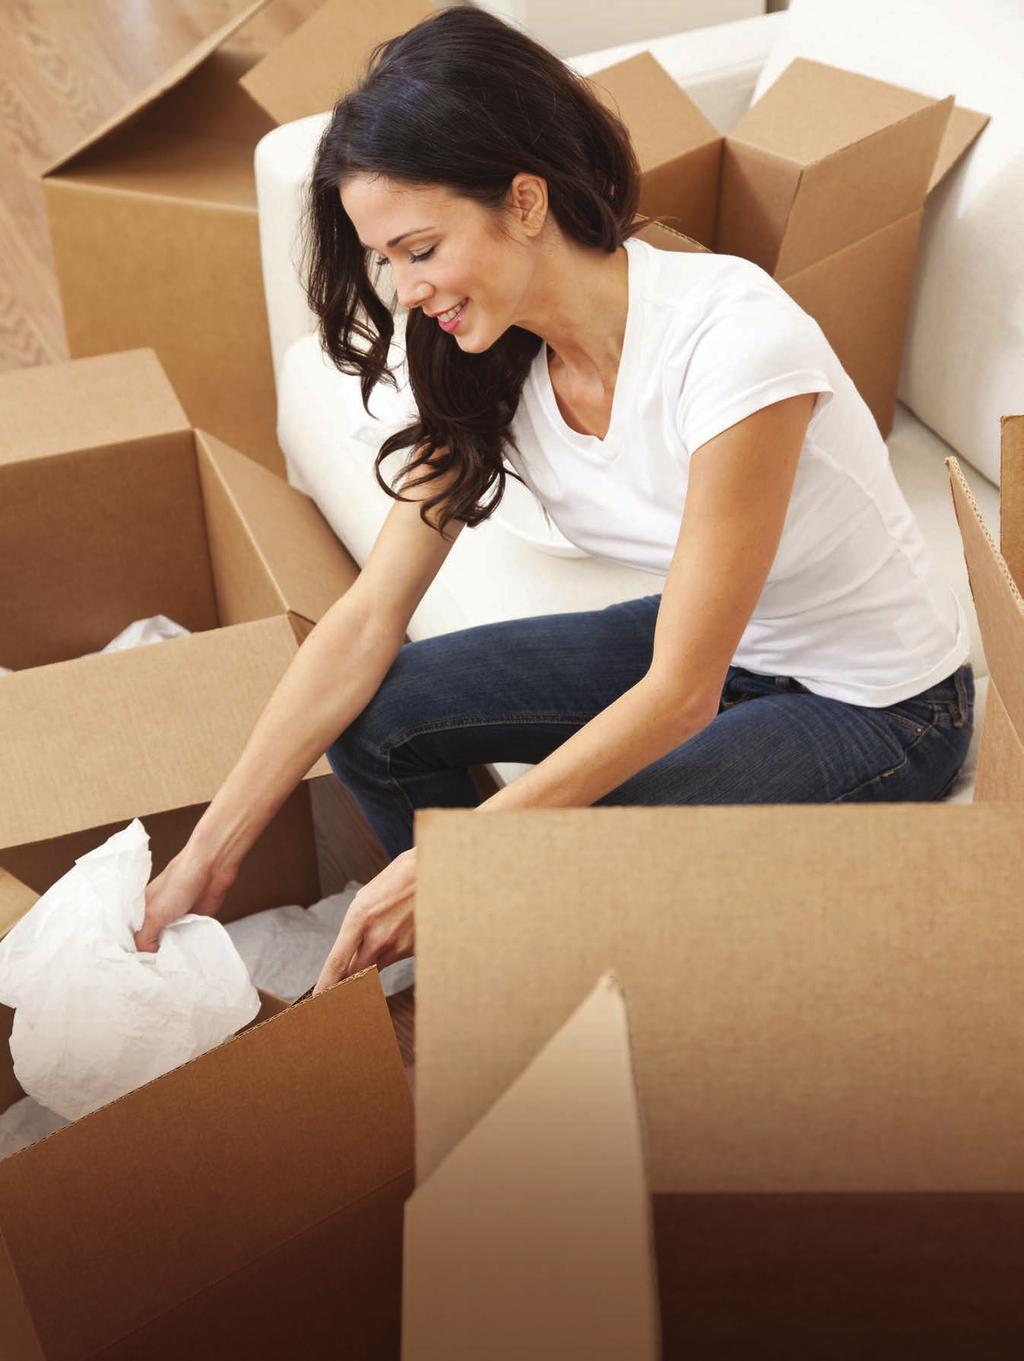 WE LL HELP TO get you moving with our two tailor-made packages Express Mover To make the whole process of selling and buying easier, Bellway has put together a range of services.